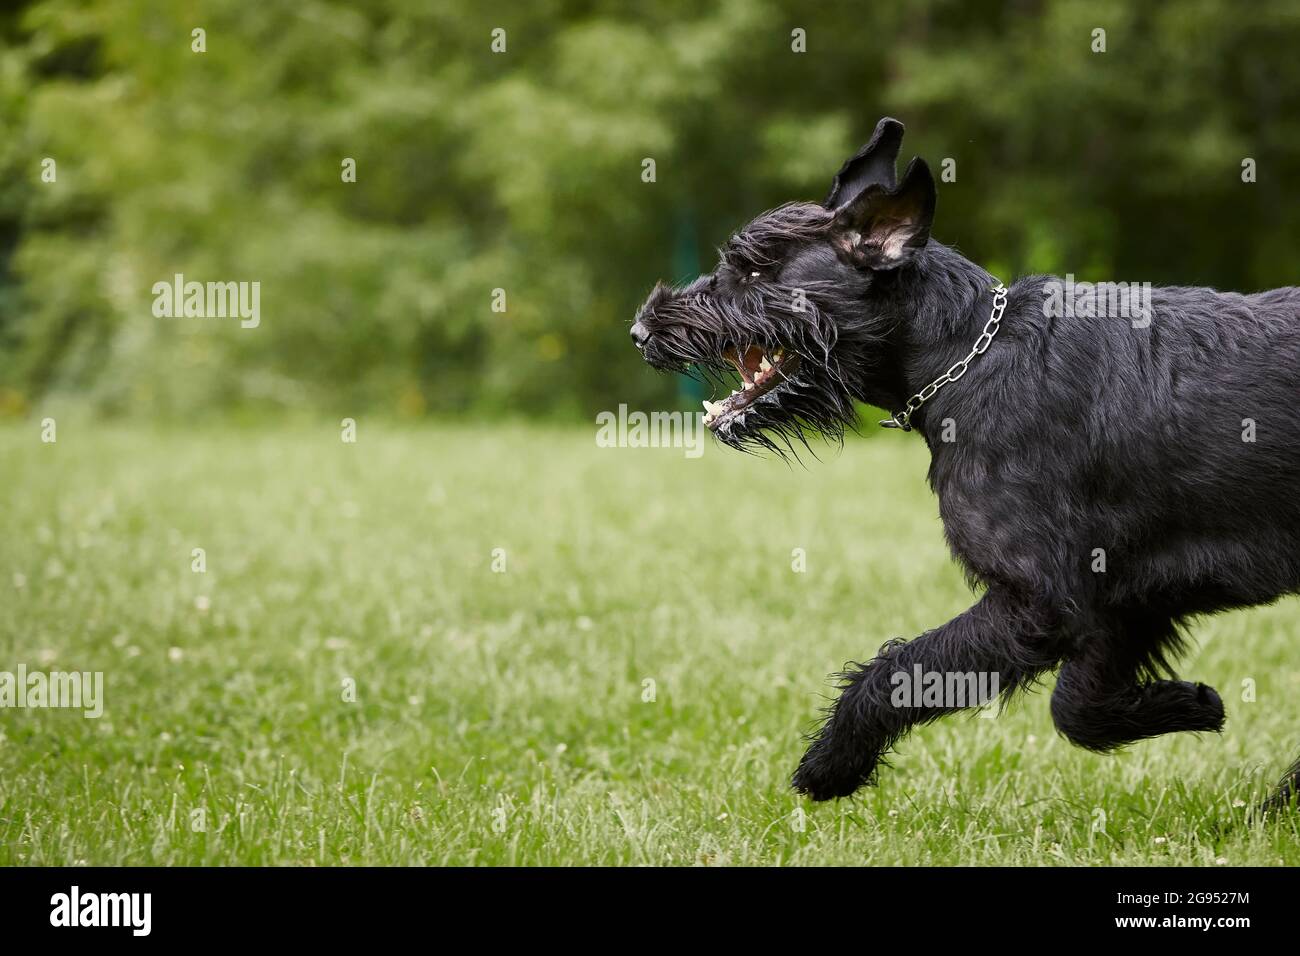 Dog running in grass. Black Giant Schnauzer sprinting on meadow during summer day. Stock Photo